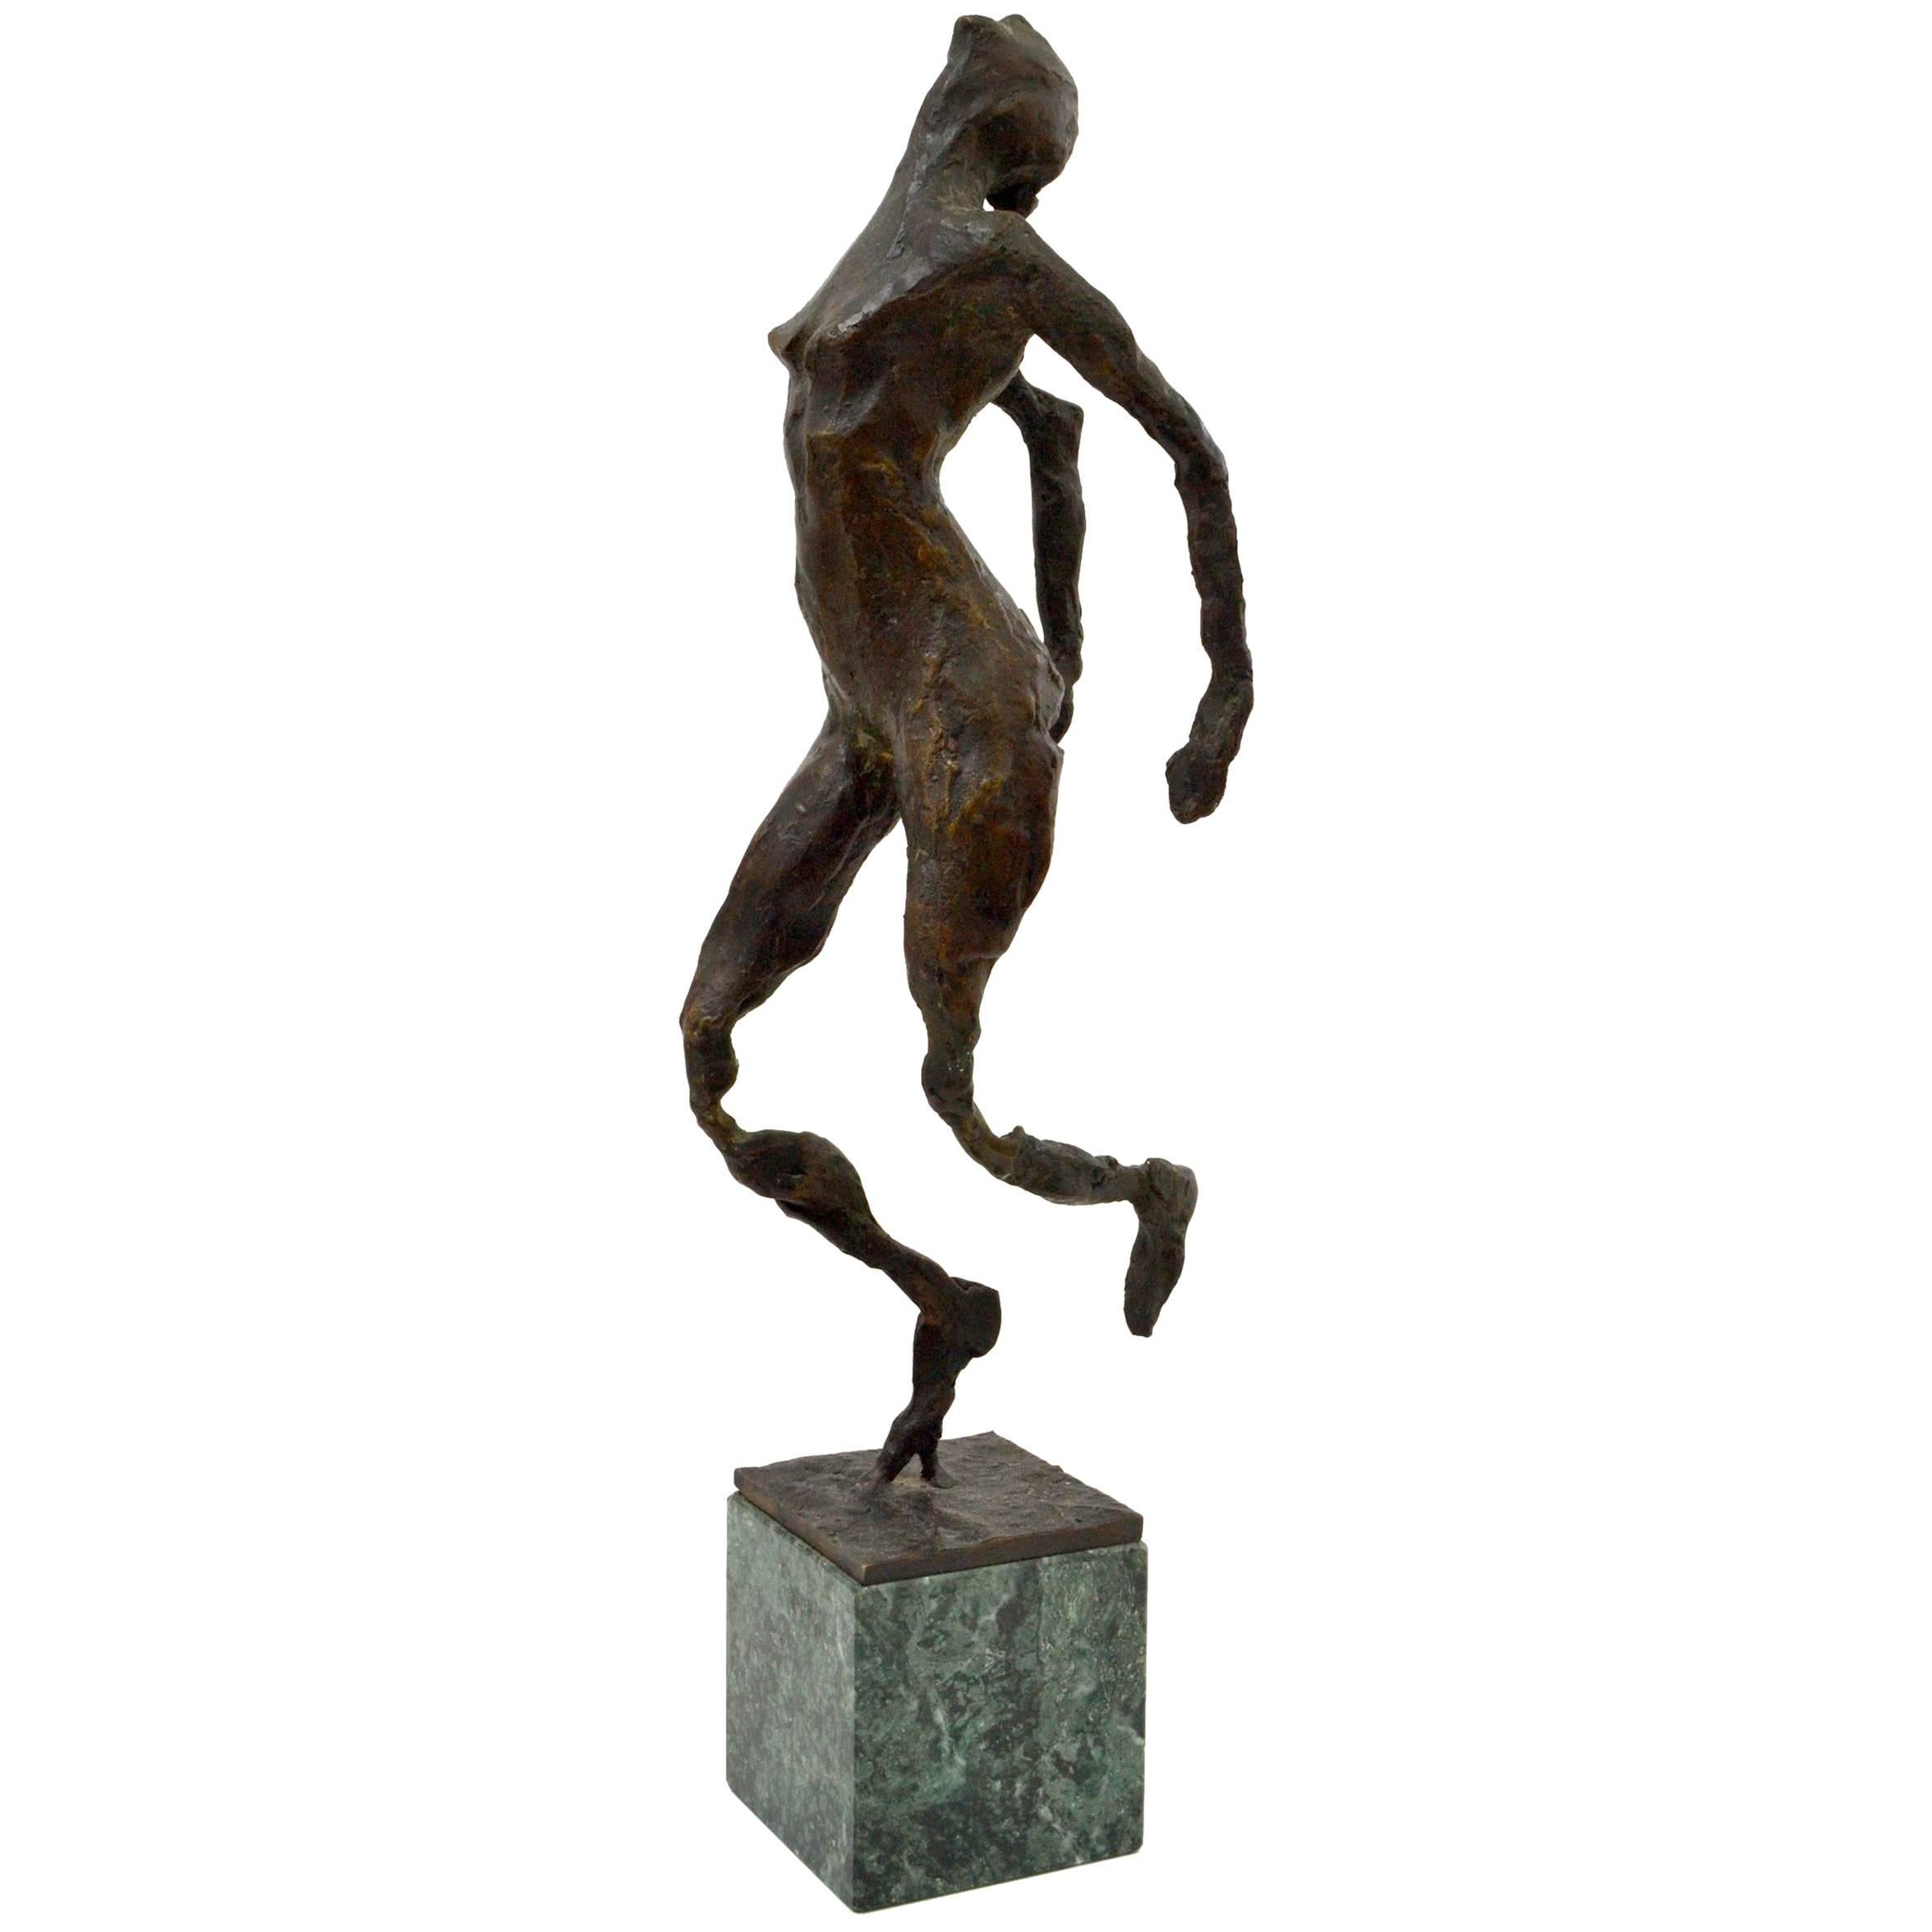 Bronze cast sculpture of female nude dancing figure placed on a green marble base is made by the Dutch artist M. Frijling.
The tactile and rough surface of the figure and the elongated and heavily worked arms and legs emphasis on the dynamic